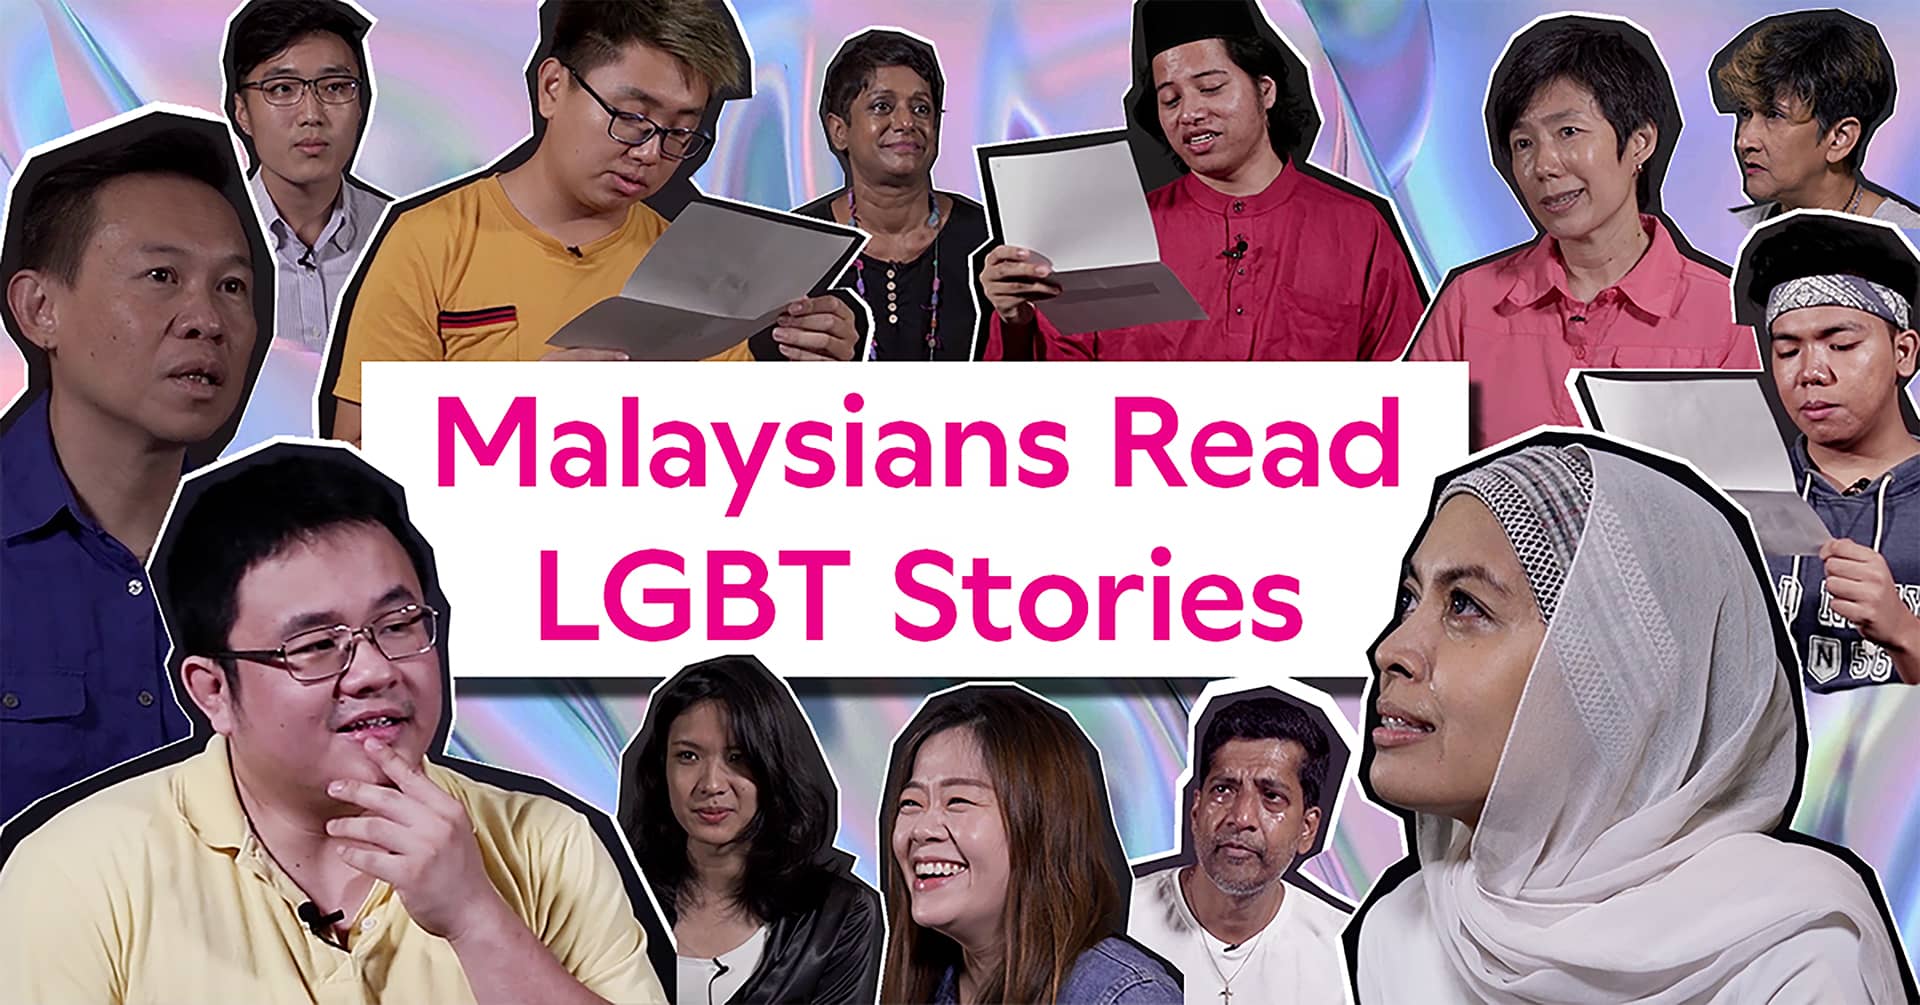 Malaysians Read LGBTQ Stories Poster, diverse people reading letters